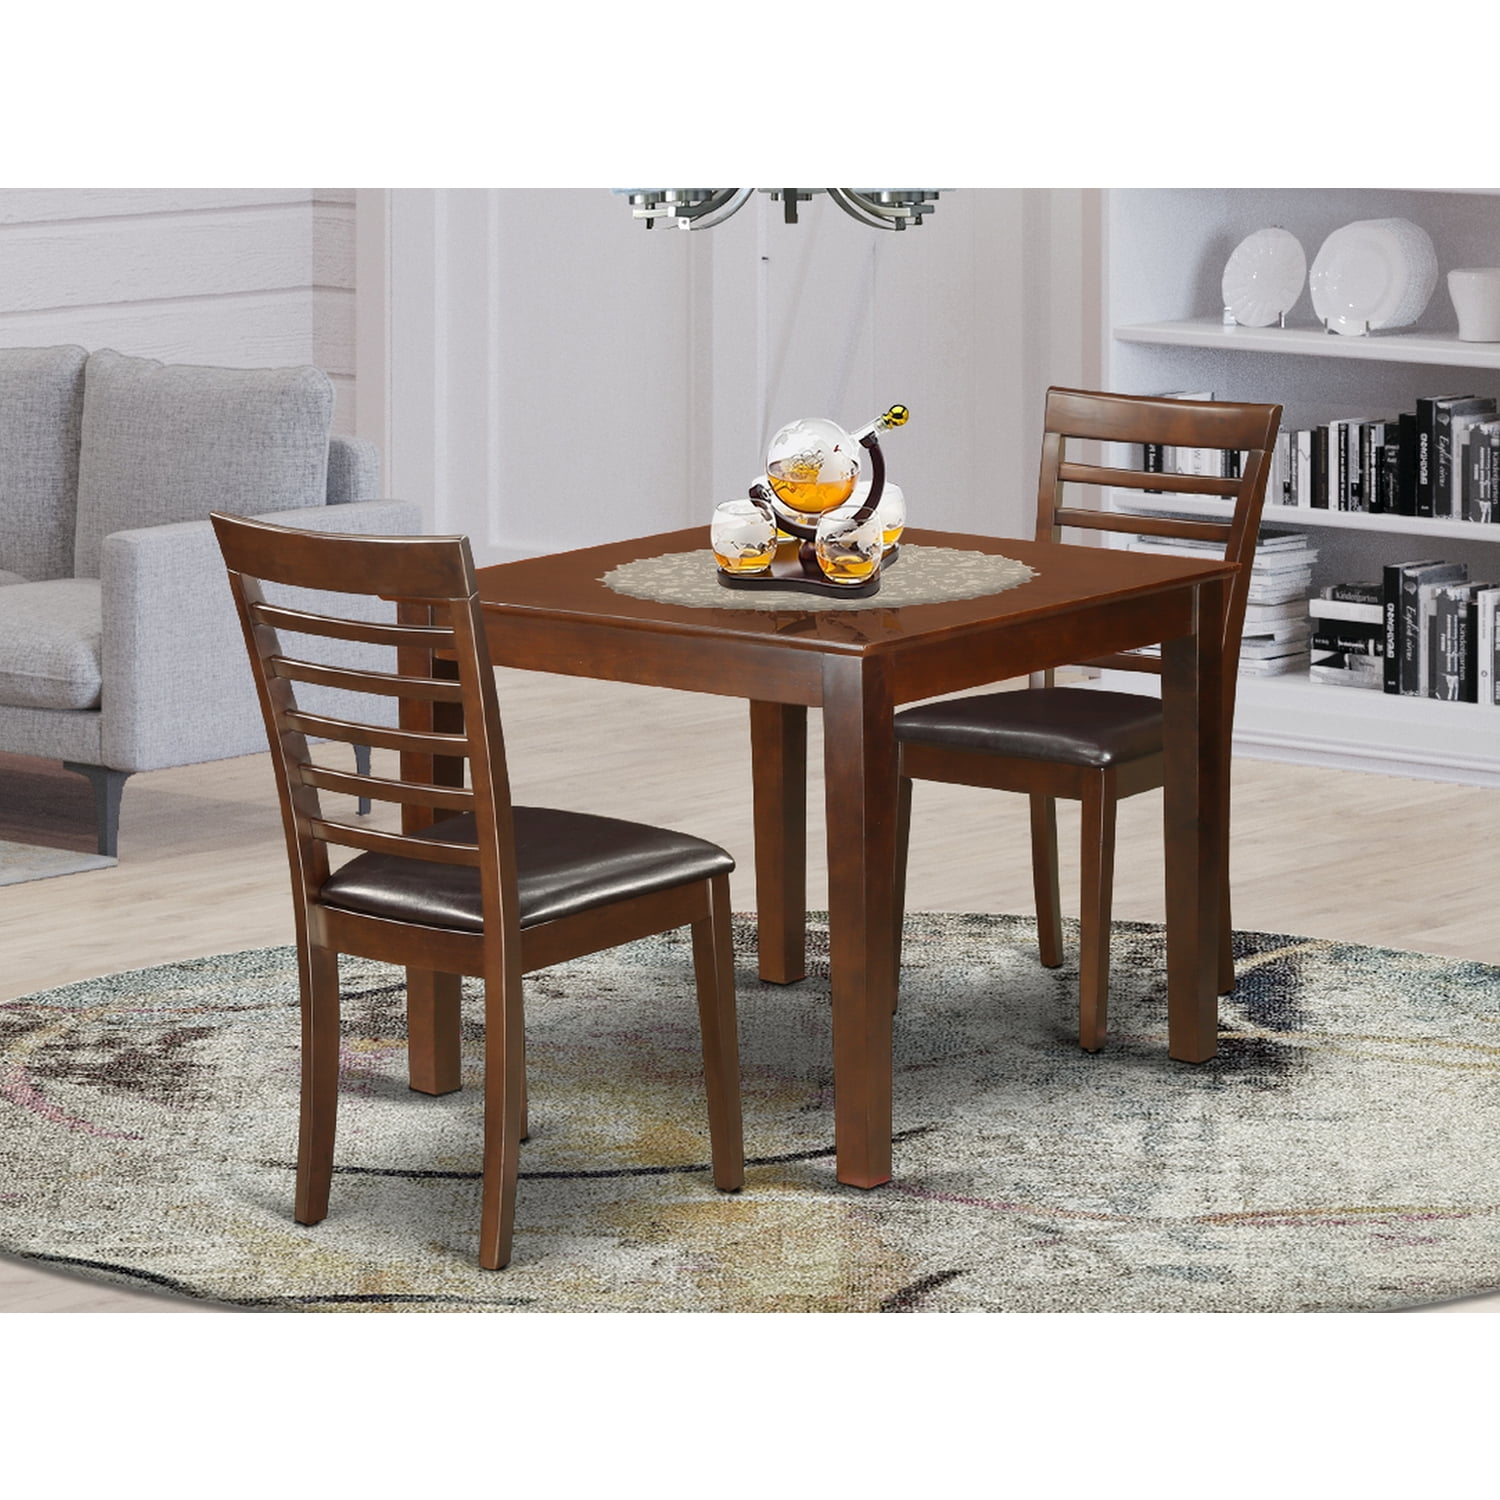 3pc dinette kitchen dining set round table with 2 wood seat chairs in mahogany 